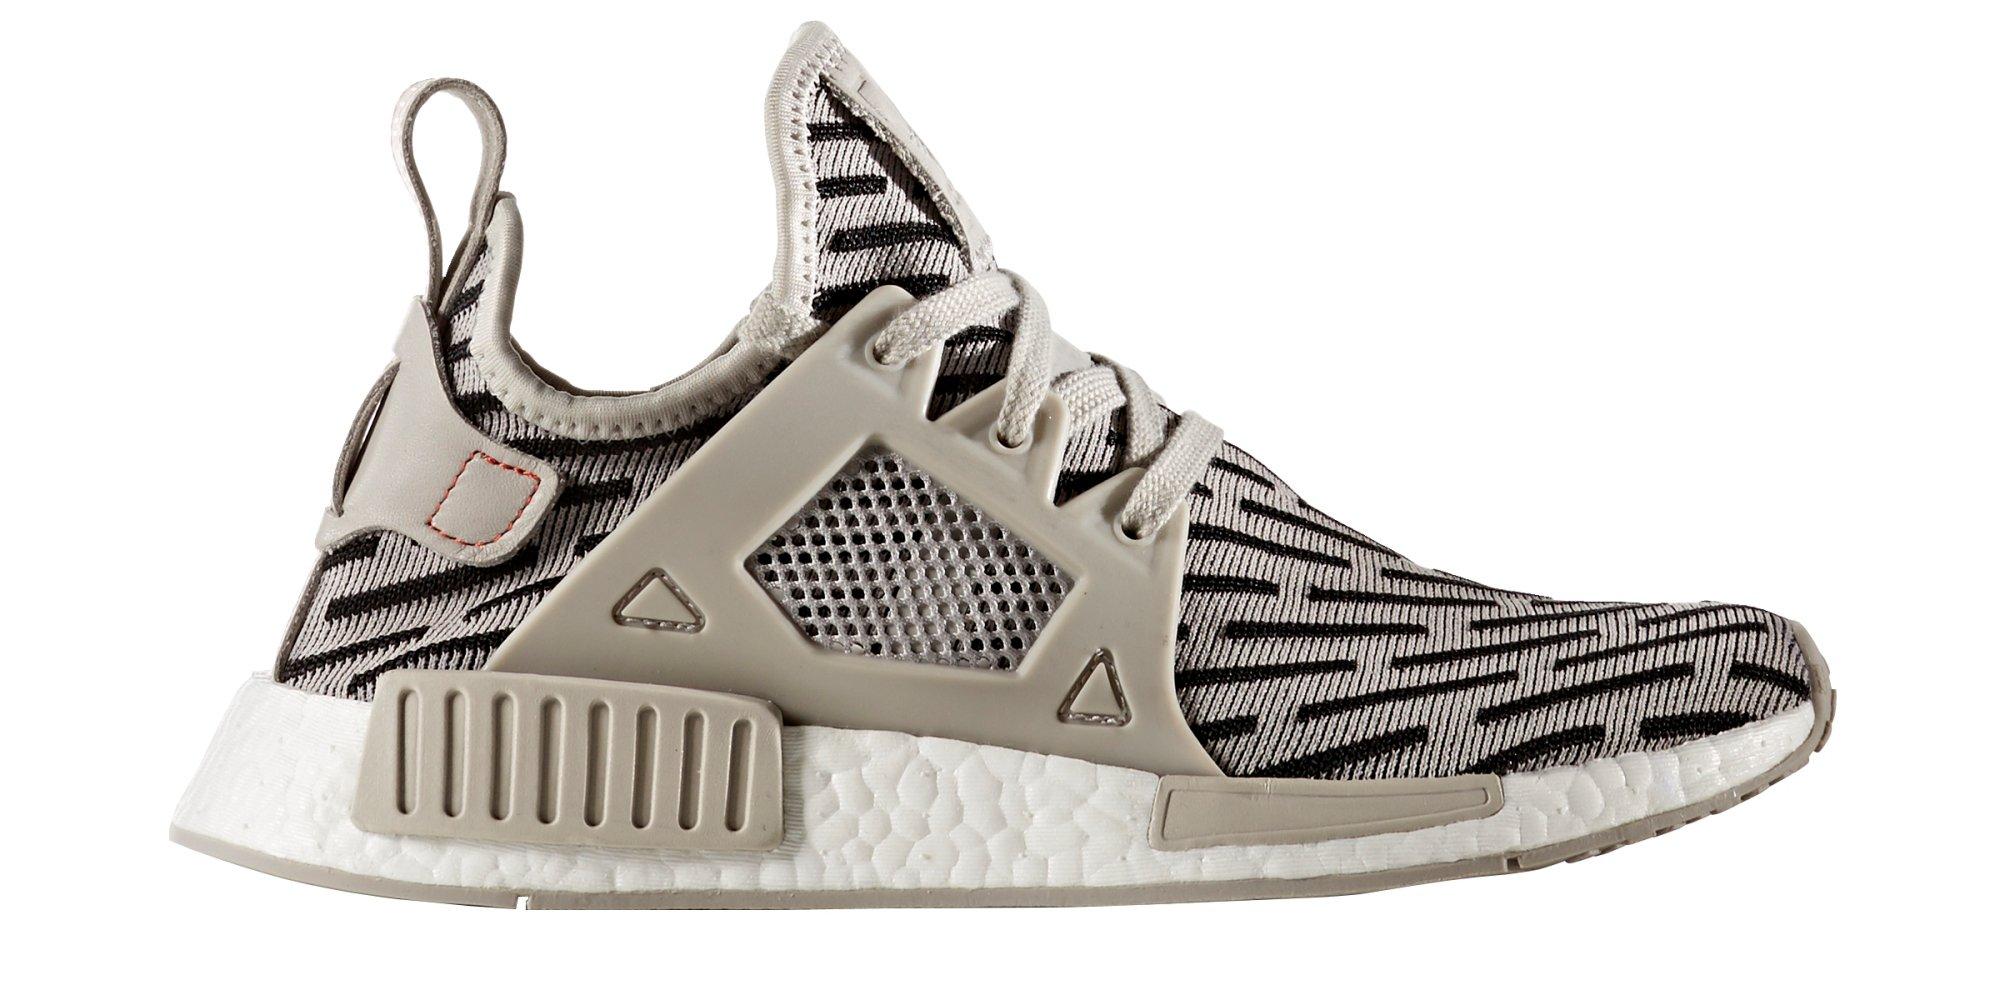 Adidas nmd xr1 black white release date by9921